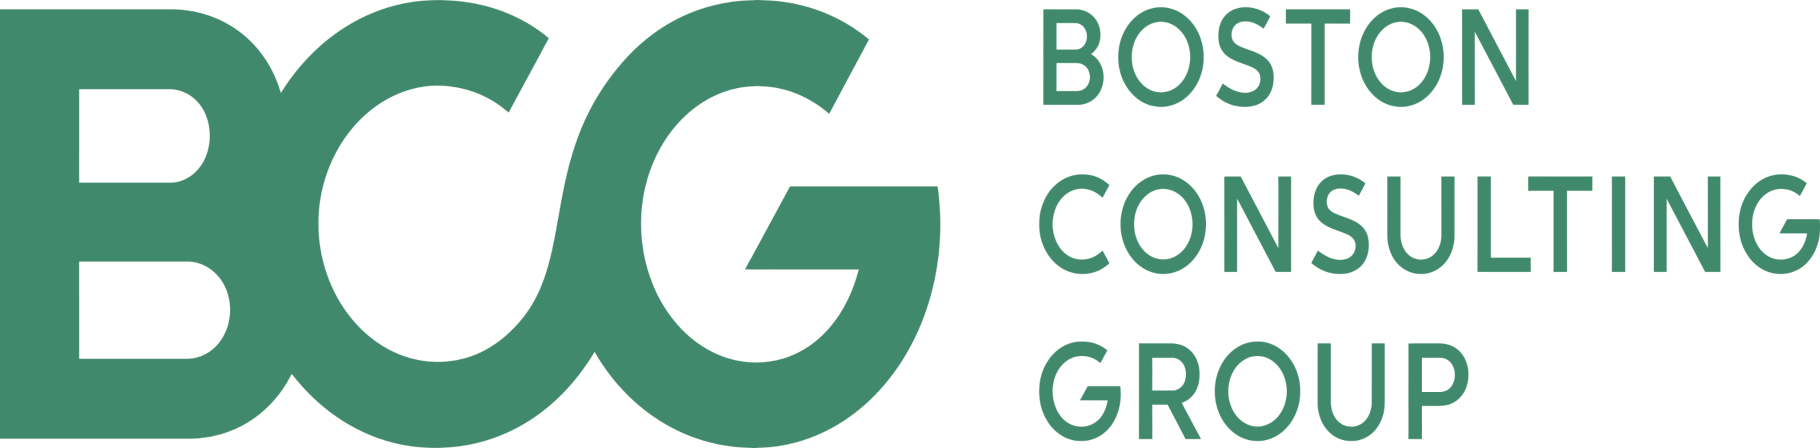 boston consulting group